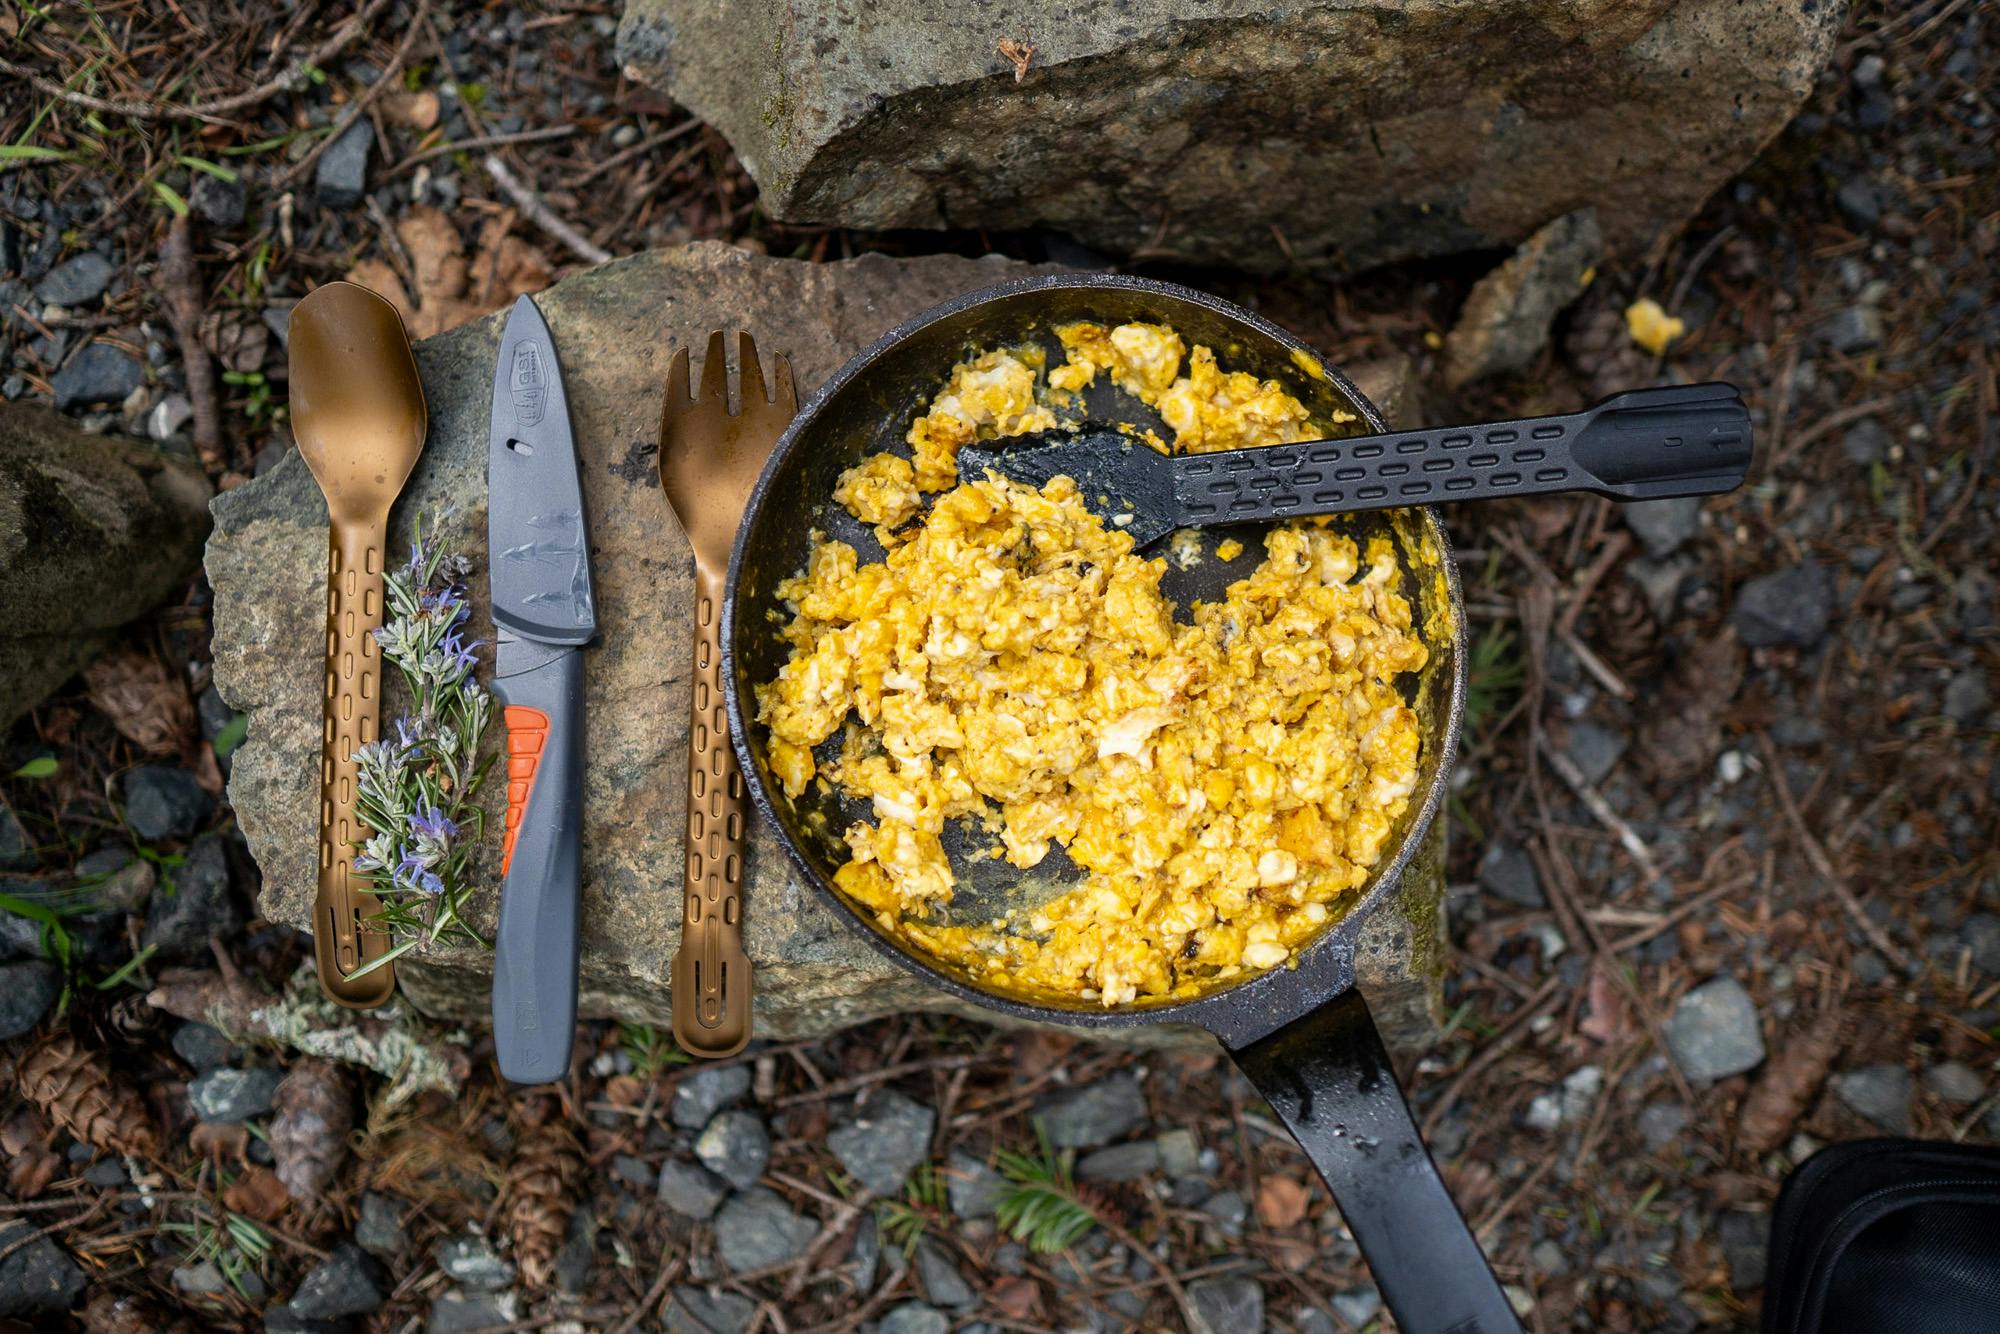 Eating eggs while bikepacking is now possible, rejoice!